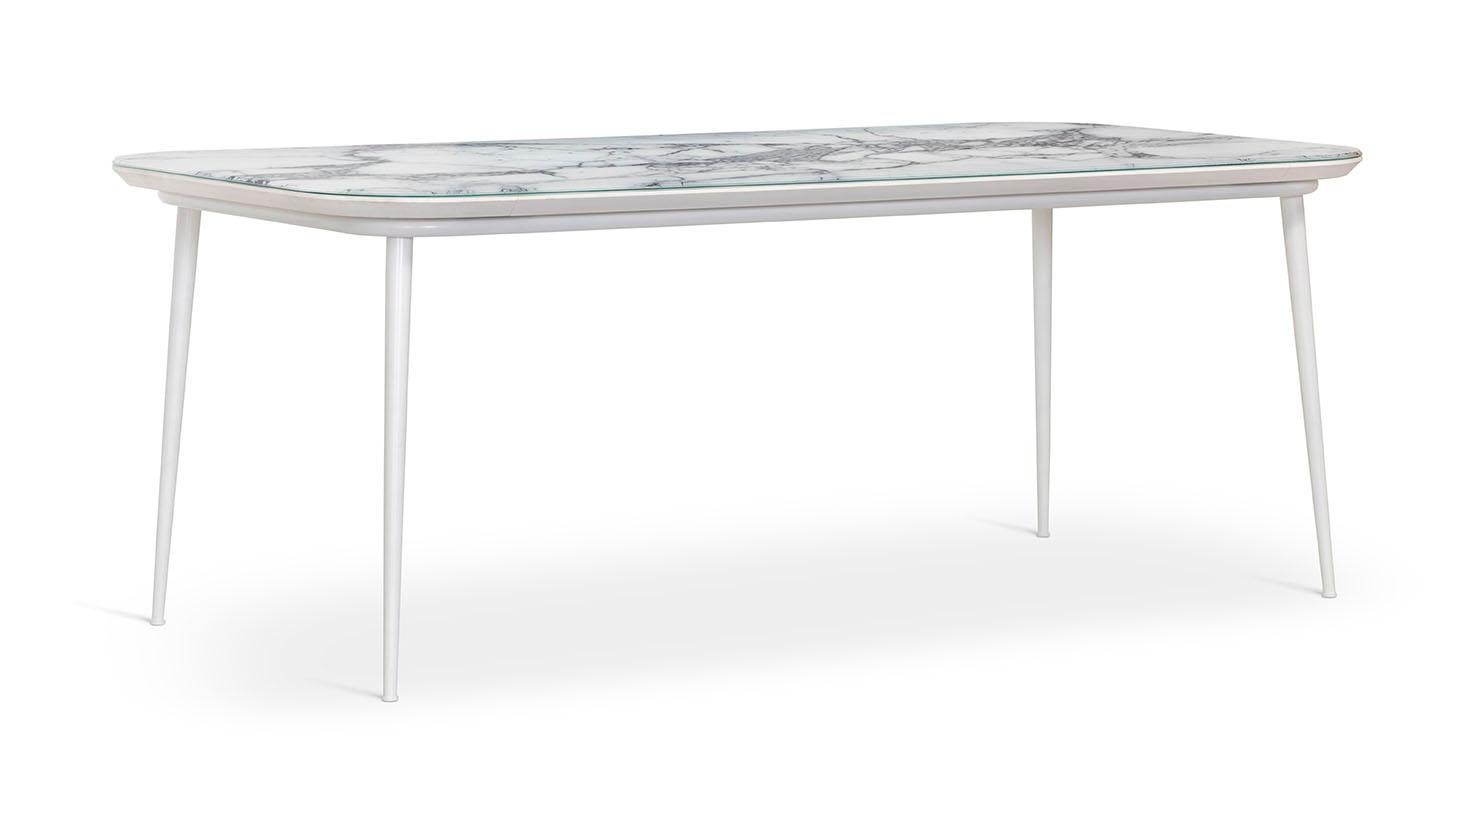 Dinner with a sea view is the perfect setting to enjoy the Filicudi outdoor table. Top in Vetrite, under top in Hpl, and legs in white lacquered aluminium, able to withstand bad weather. Filicudi can seat approximately 8 people.

Outdoor dining